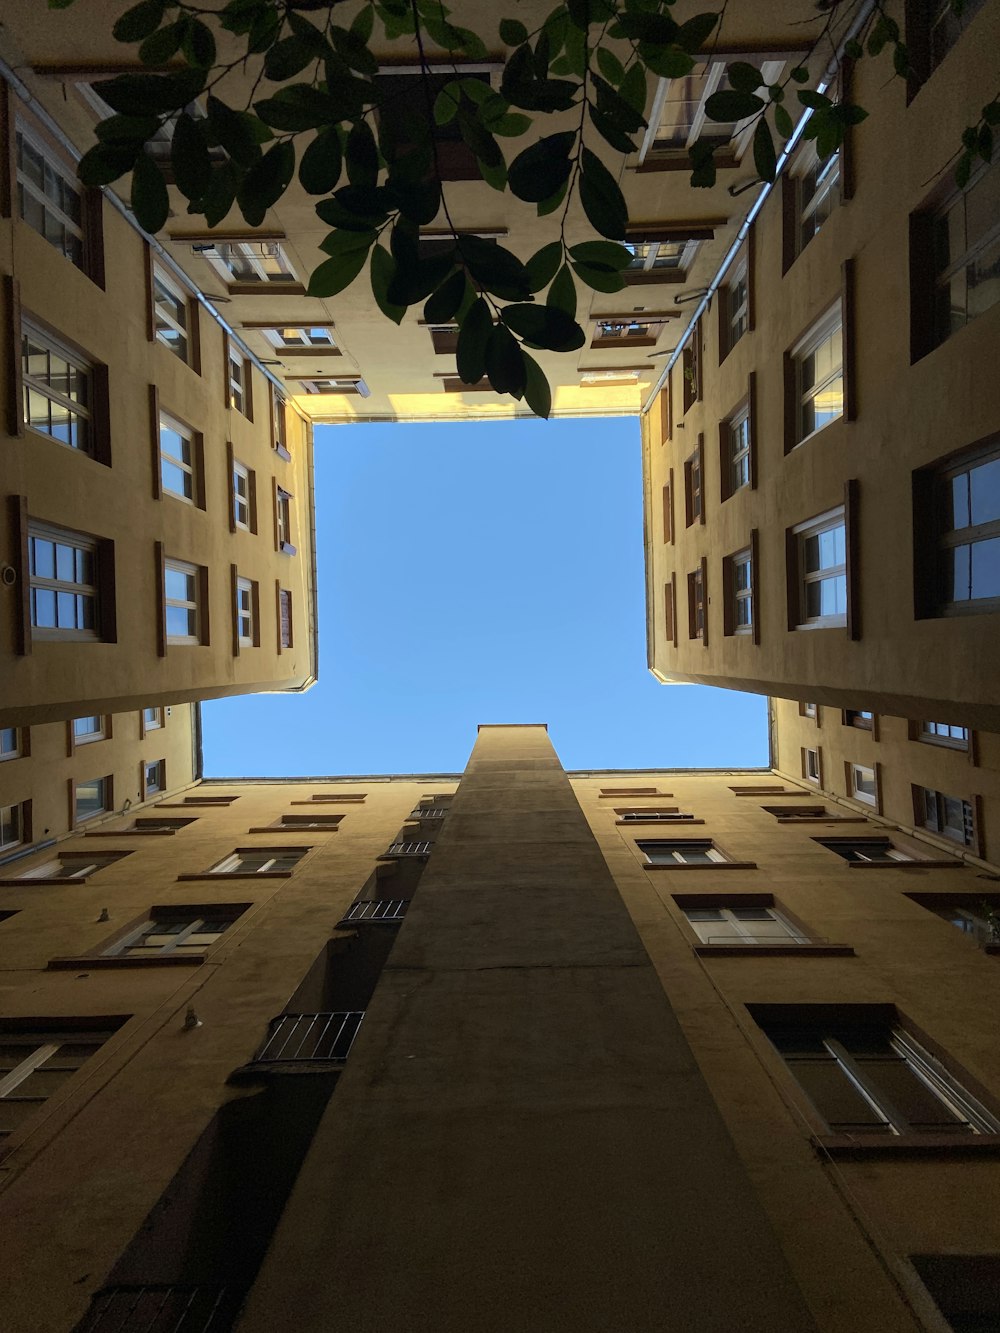 a tall building with windows and a sky in the background